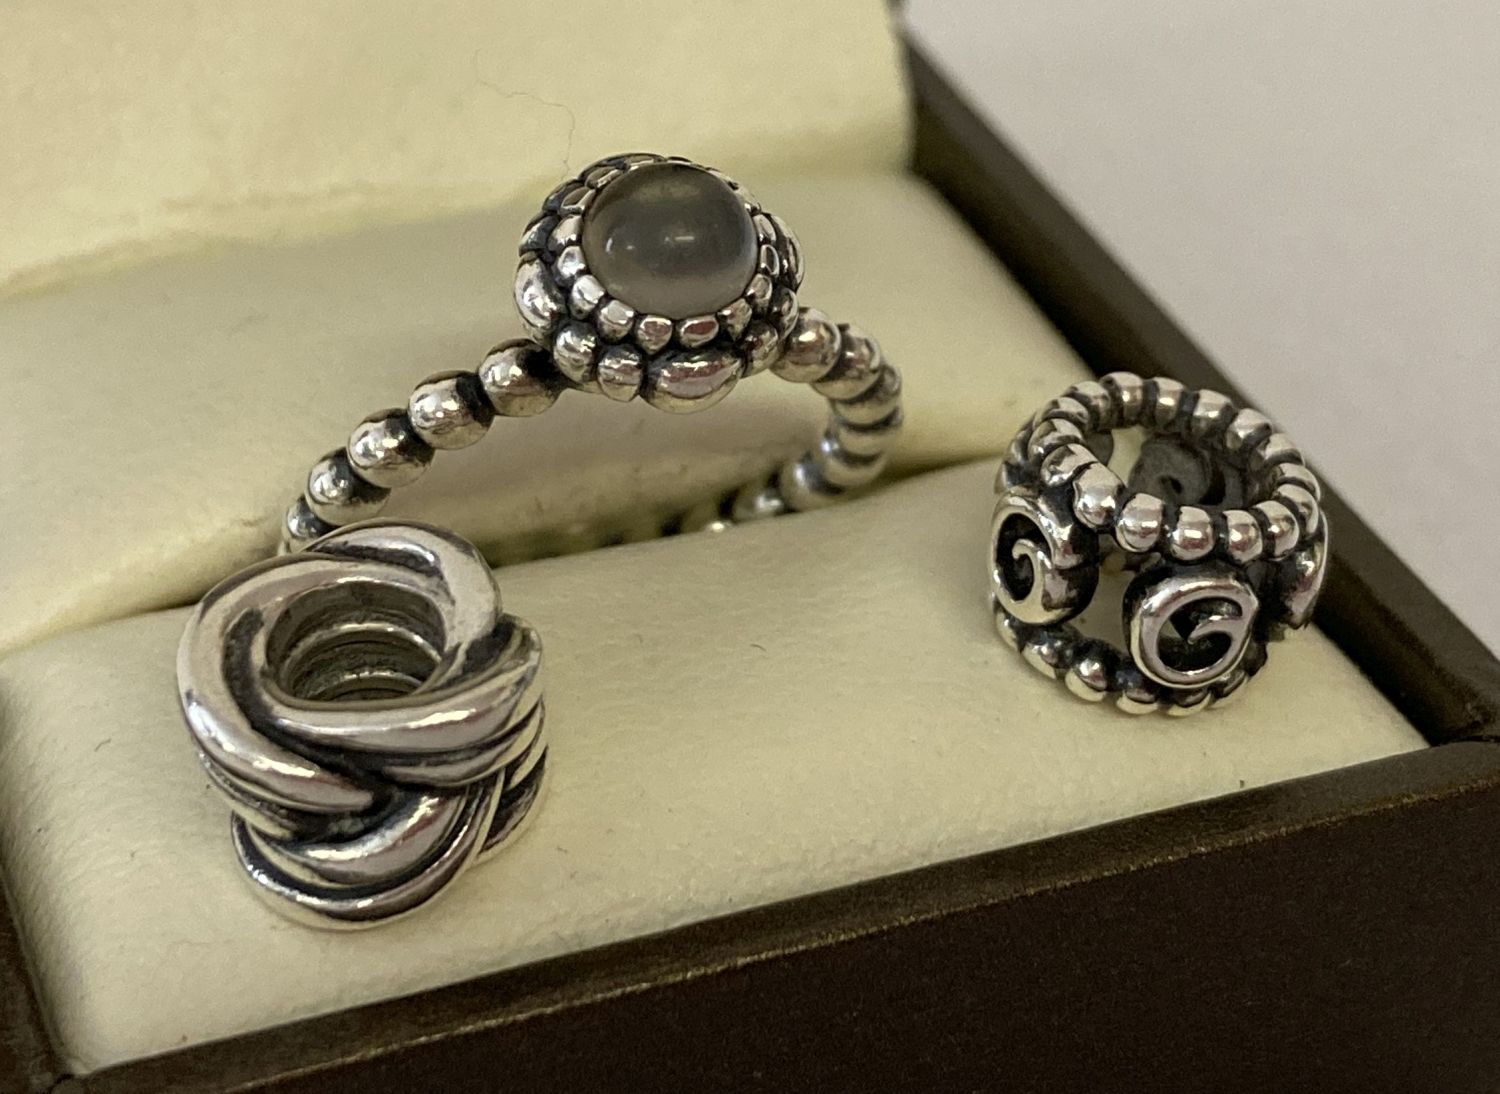 A Pandora birthstone "June" ring set with pale grey stone. Marked S925 ALE 48.